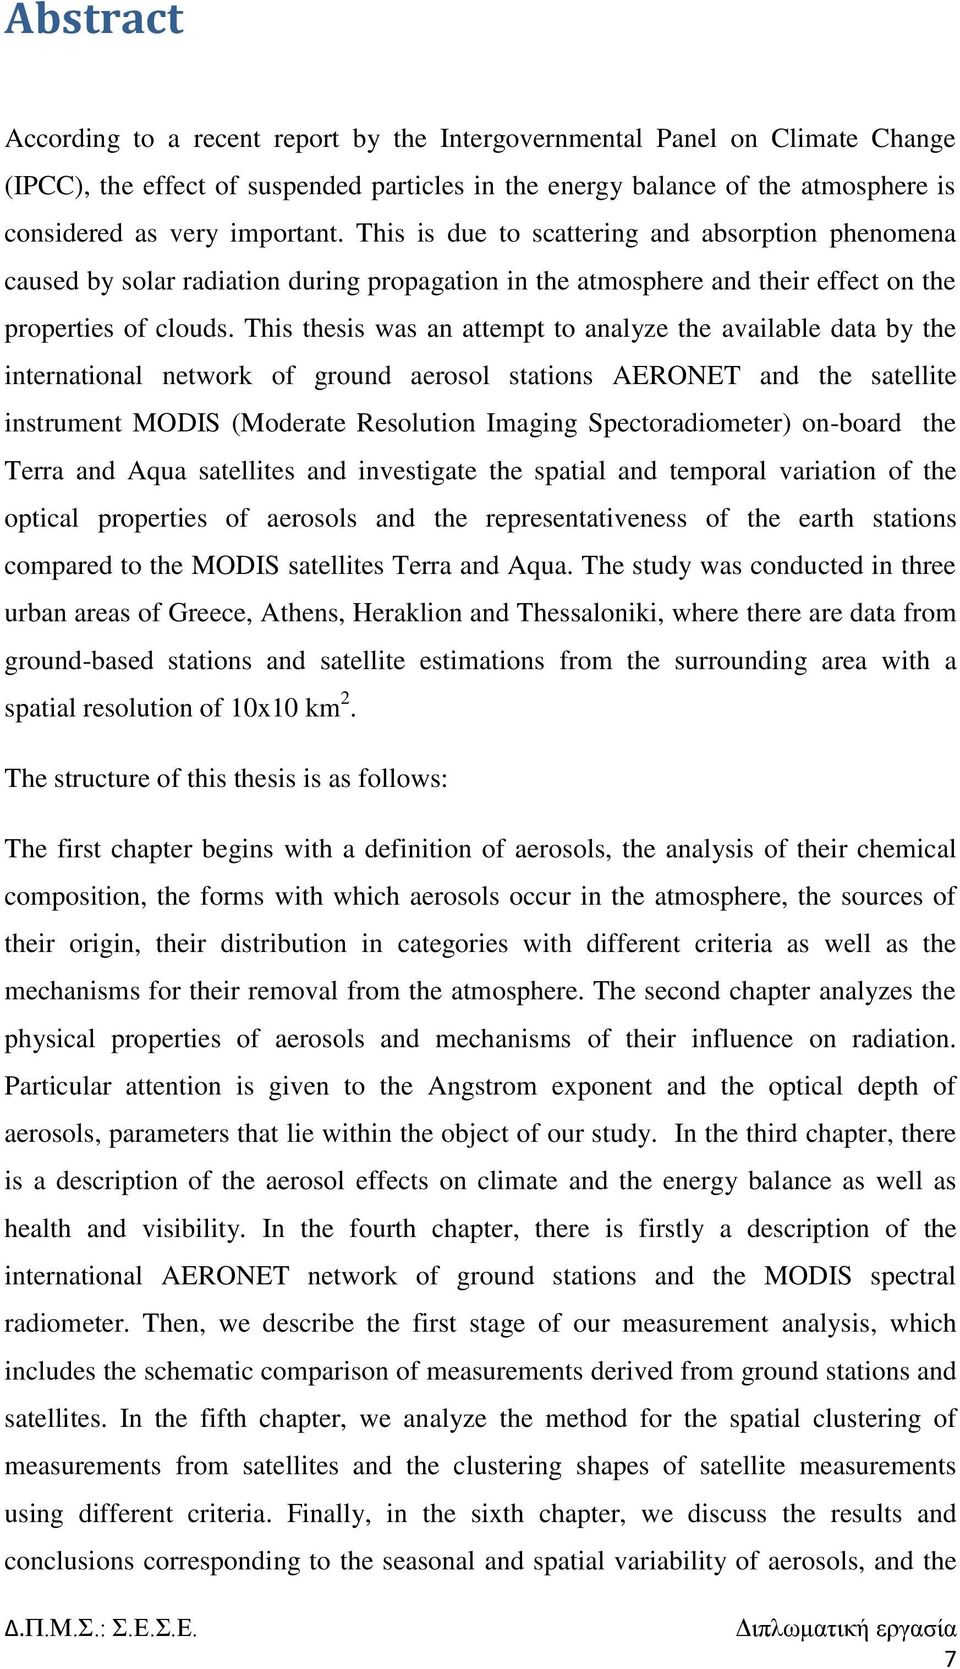 This thesis was an attempt to analyze the available data by the international network of ground aerosol stations AERONET and the satellite instrument MODIS (Moderate Resolution Imaging